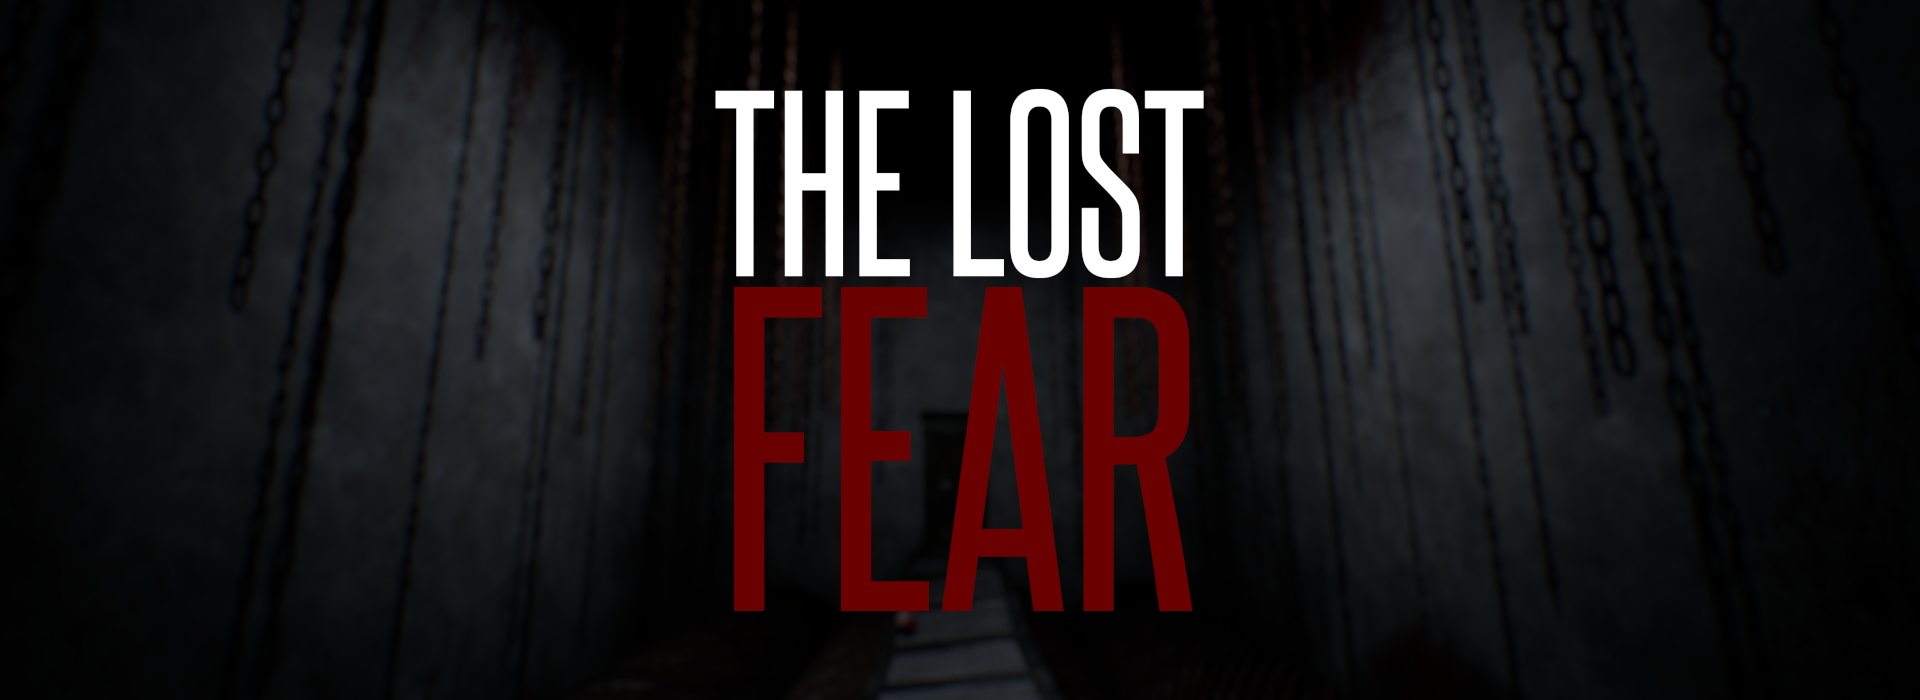 The Lost Fear